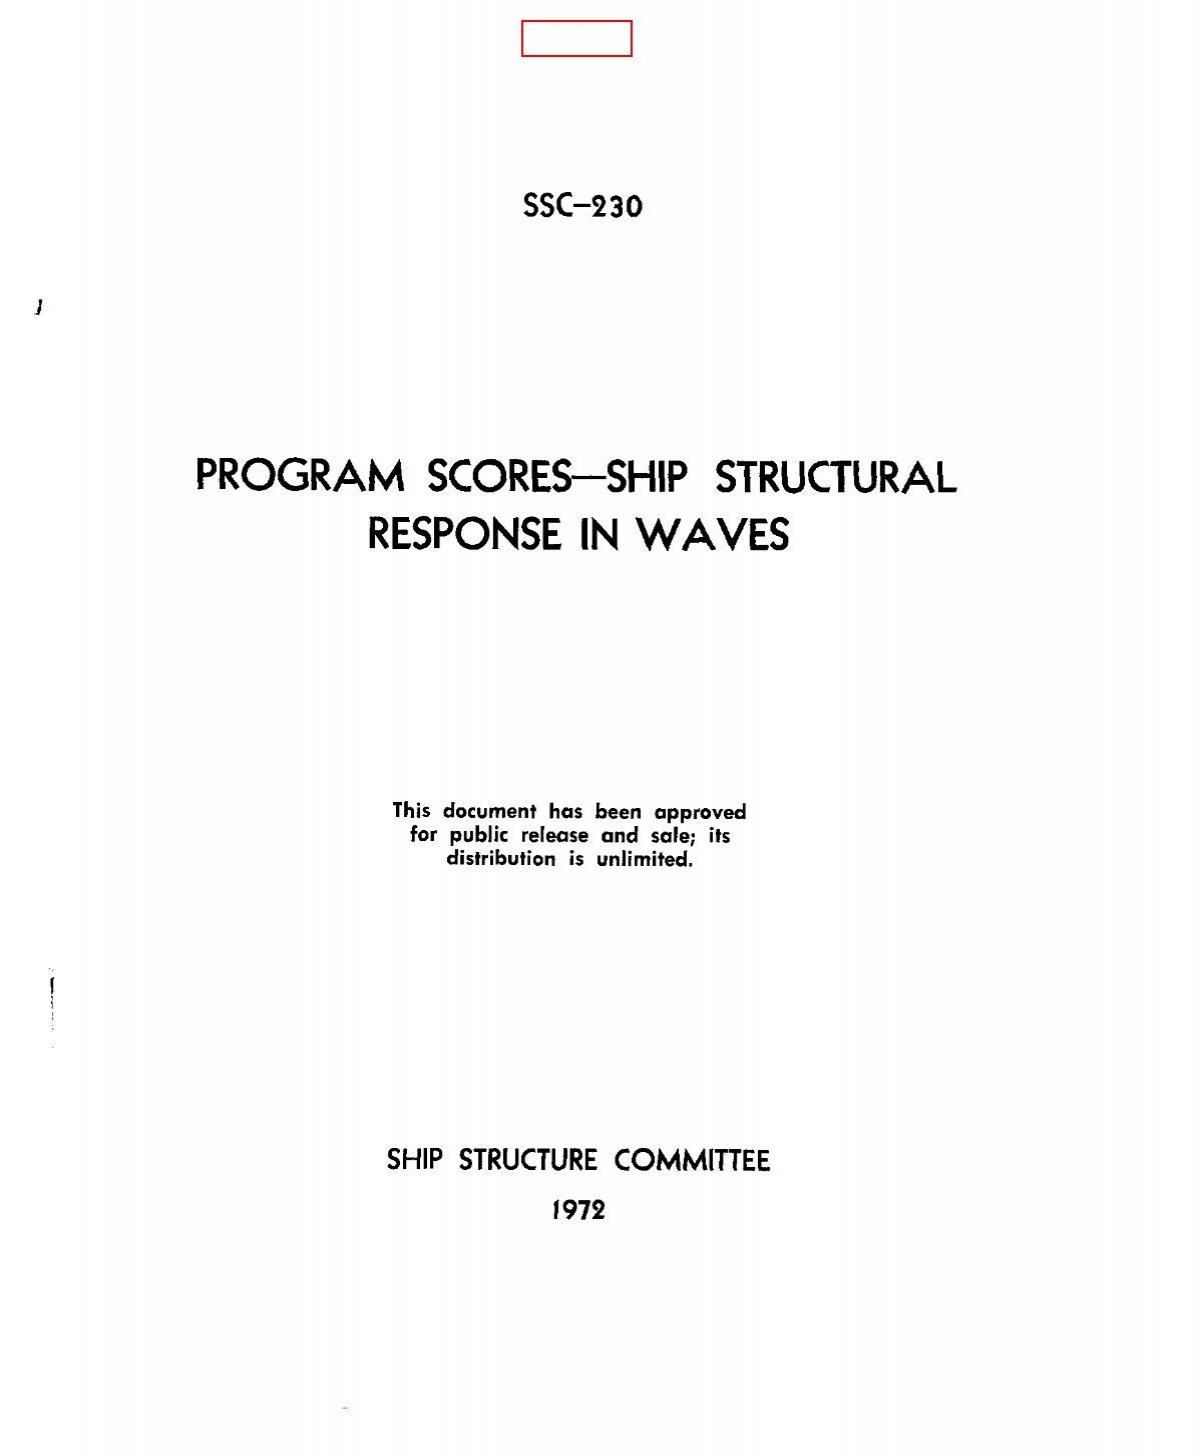 program scores-ship structural response in waves - Ship Structure 